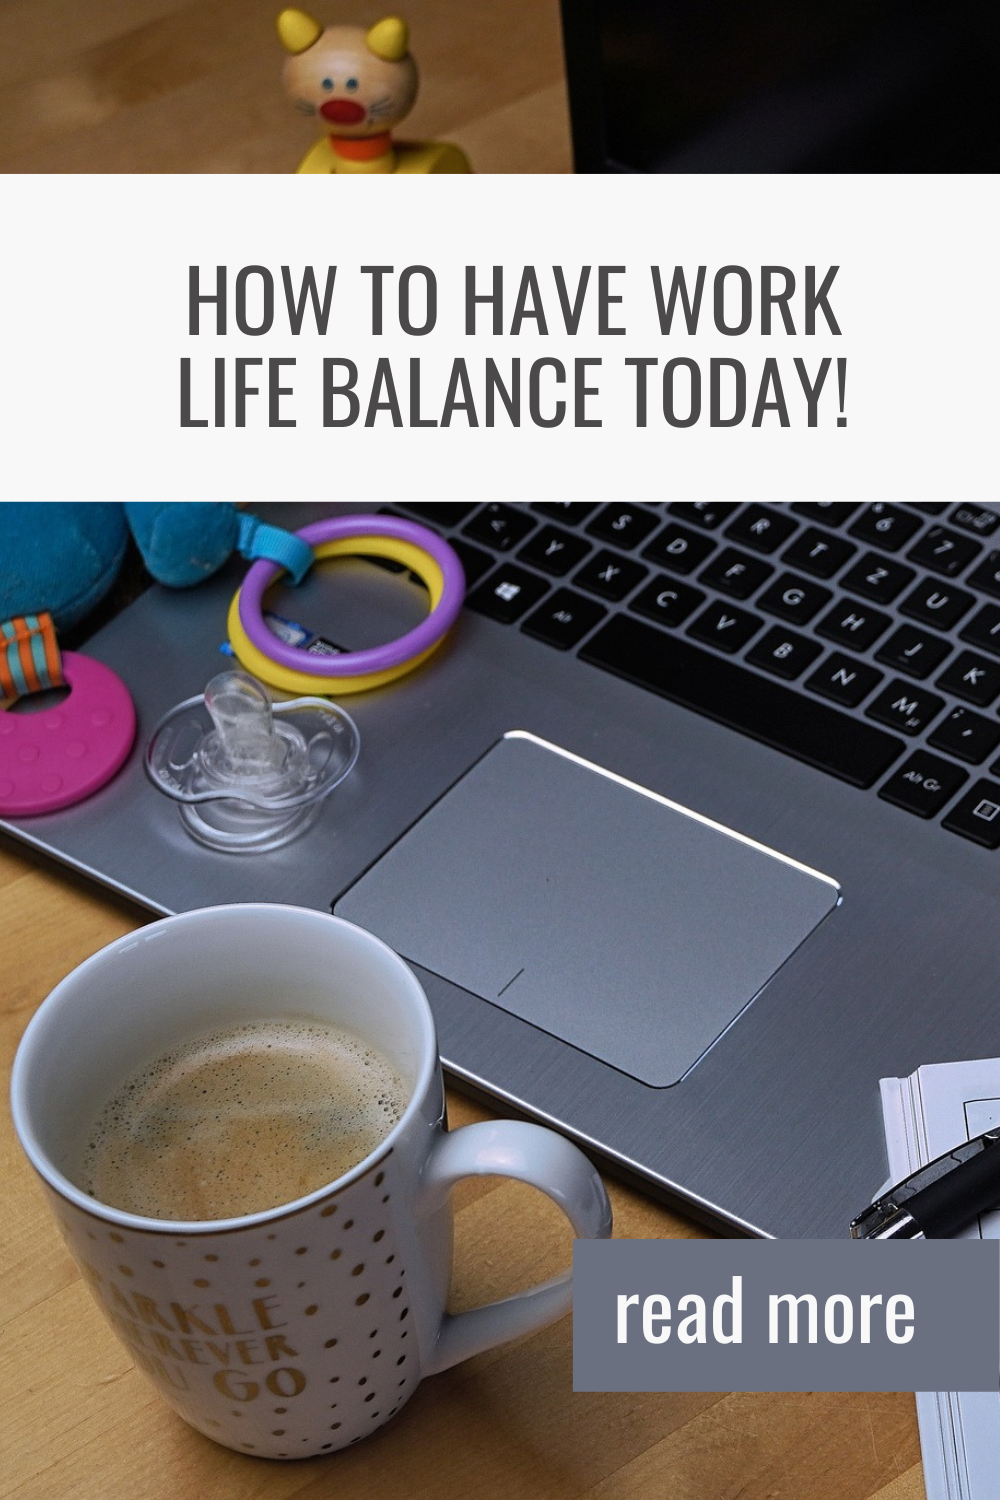 How To Have Work Life Balance Today!